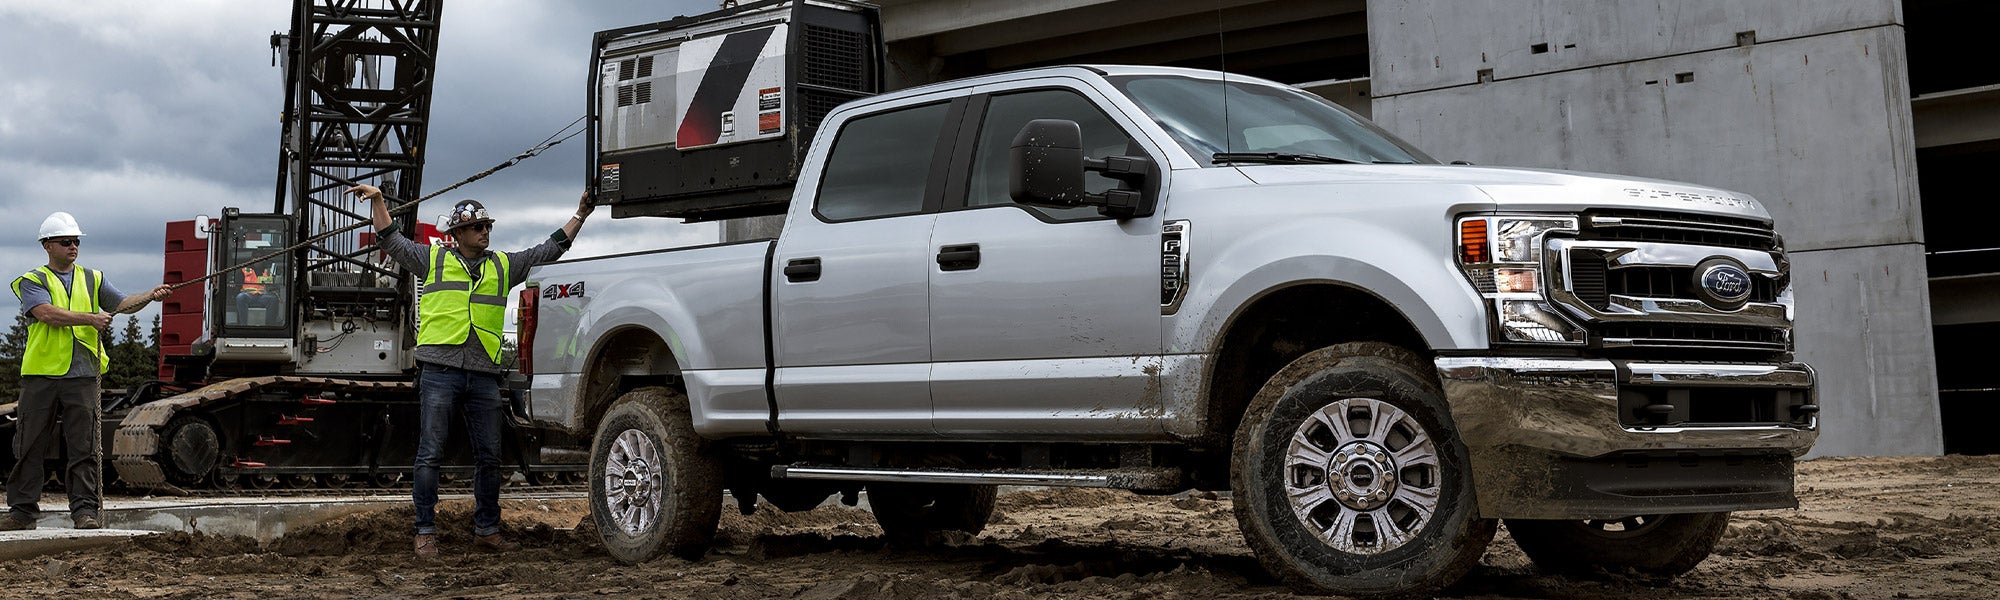 Ford F-250 for sale in South Carolina